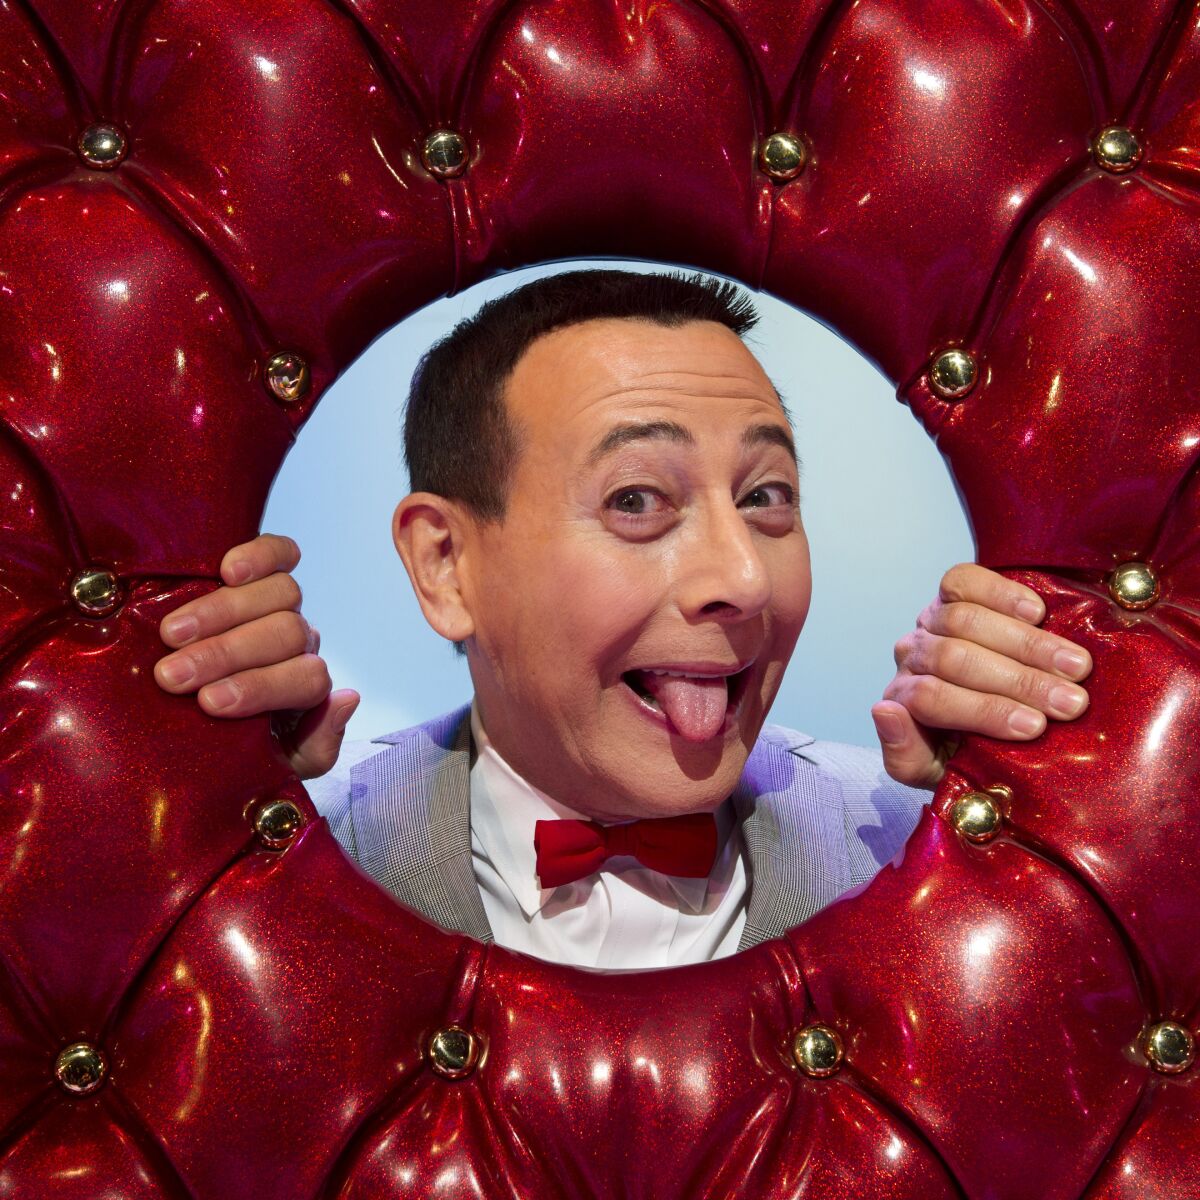 Paul Reubens sticking his tongue out and poking his head through a hole in an upholstered red donut.